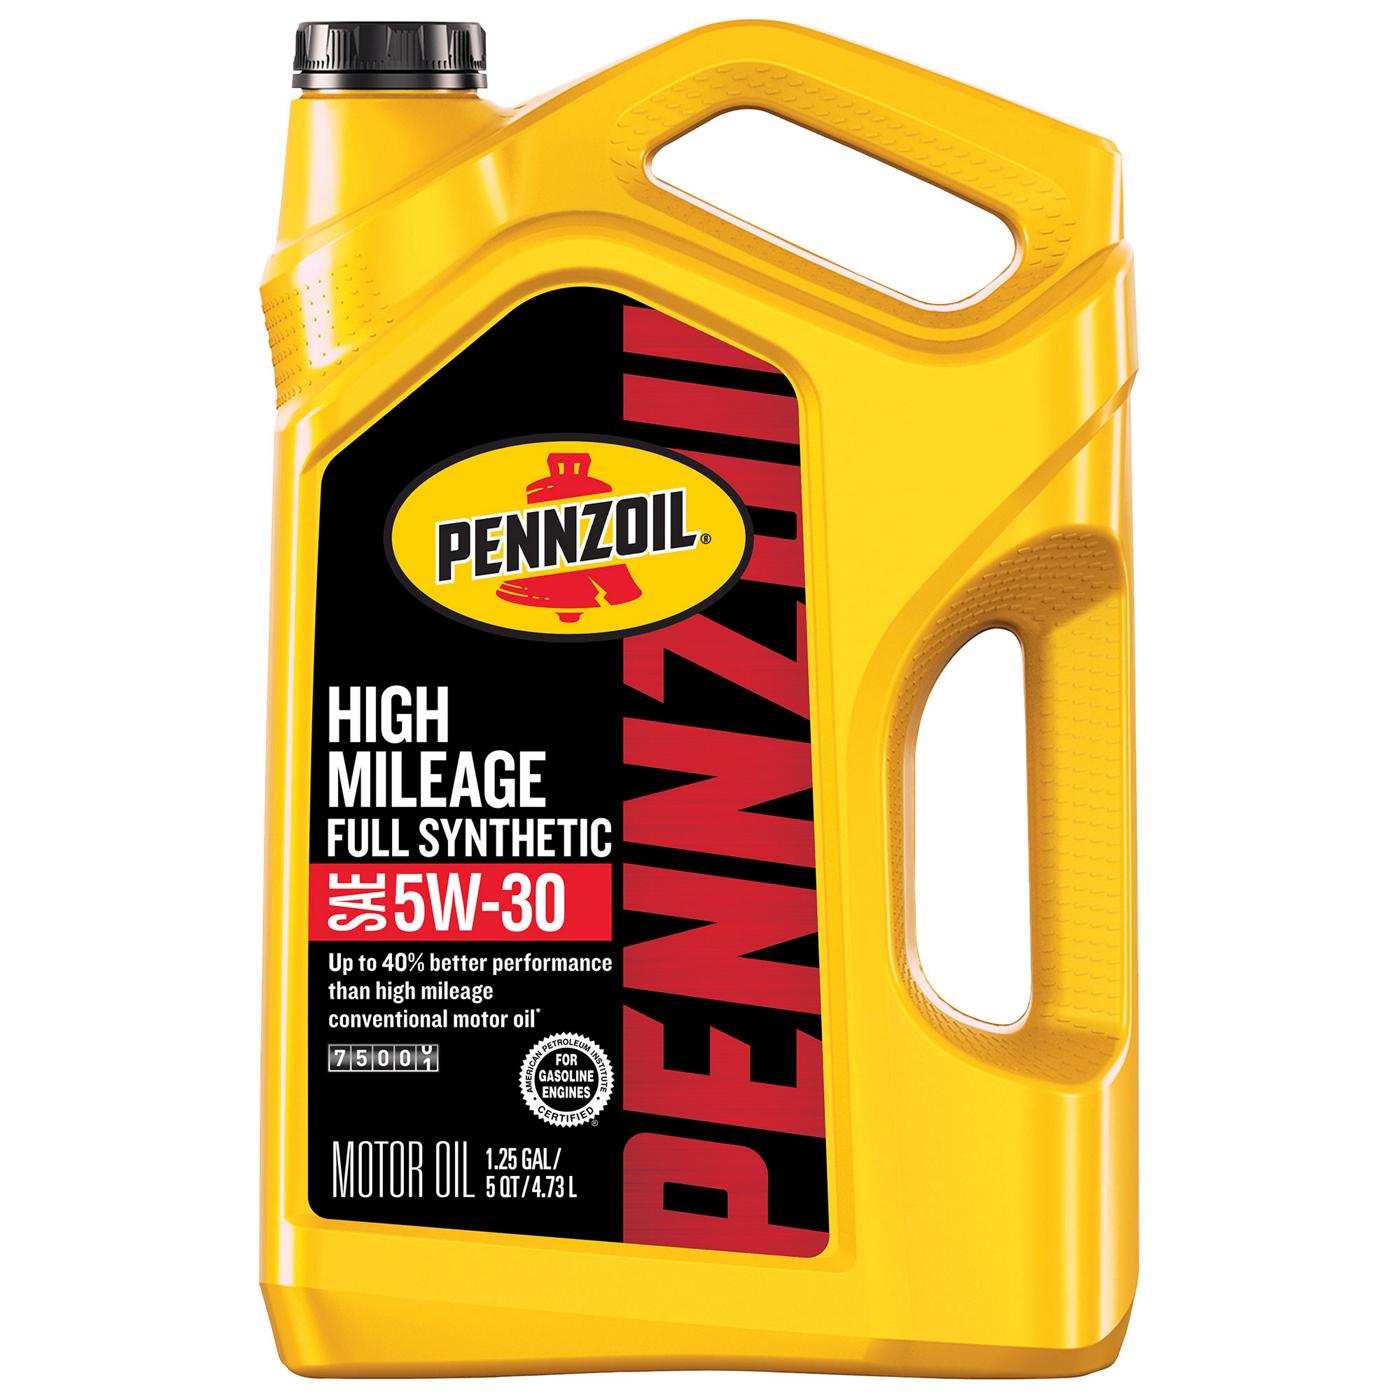 Pennzoil High Mileage Full Synthetic SAE 5W-30 Motor Oil; image 1 of 2